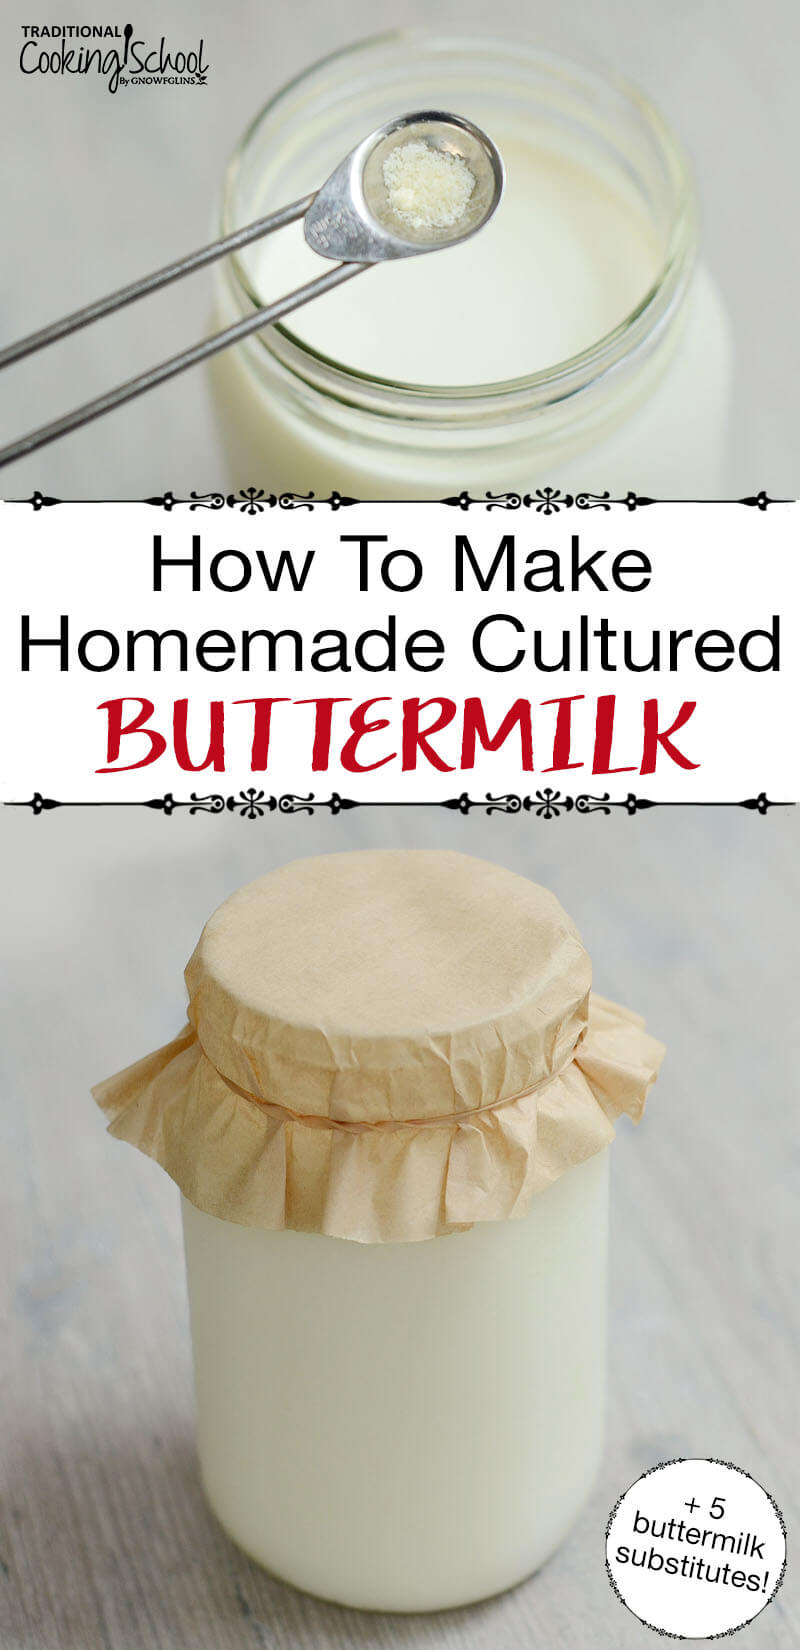 photo collage of how to make buttermilk, including a measuring spoon of powdered buttermilk starter, and a glass Mason jar of milk culturing with a coffee filter secured with a rubber band over the top, with a text overlay: "How To Make Homemade Cultured Buttermilk (+5 buttermilk substitutes!)"